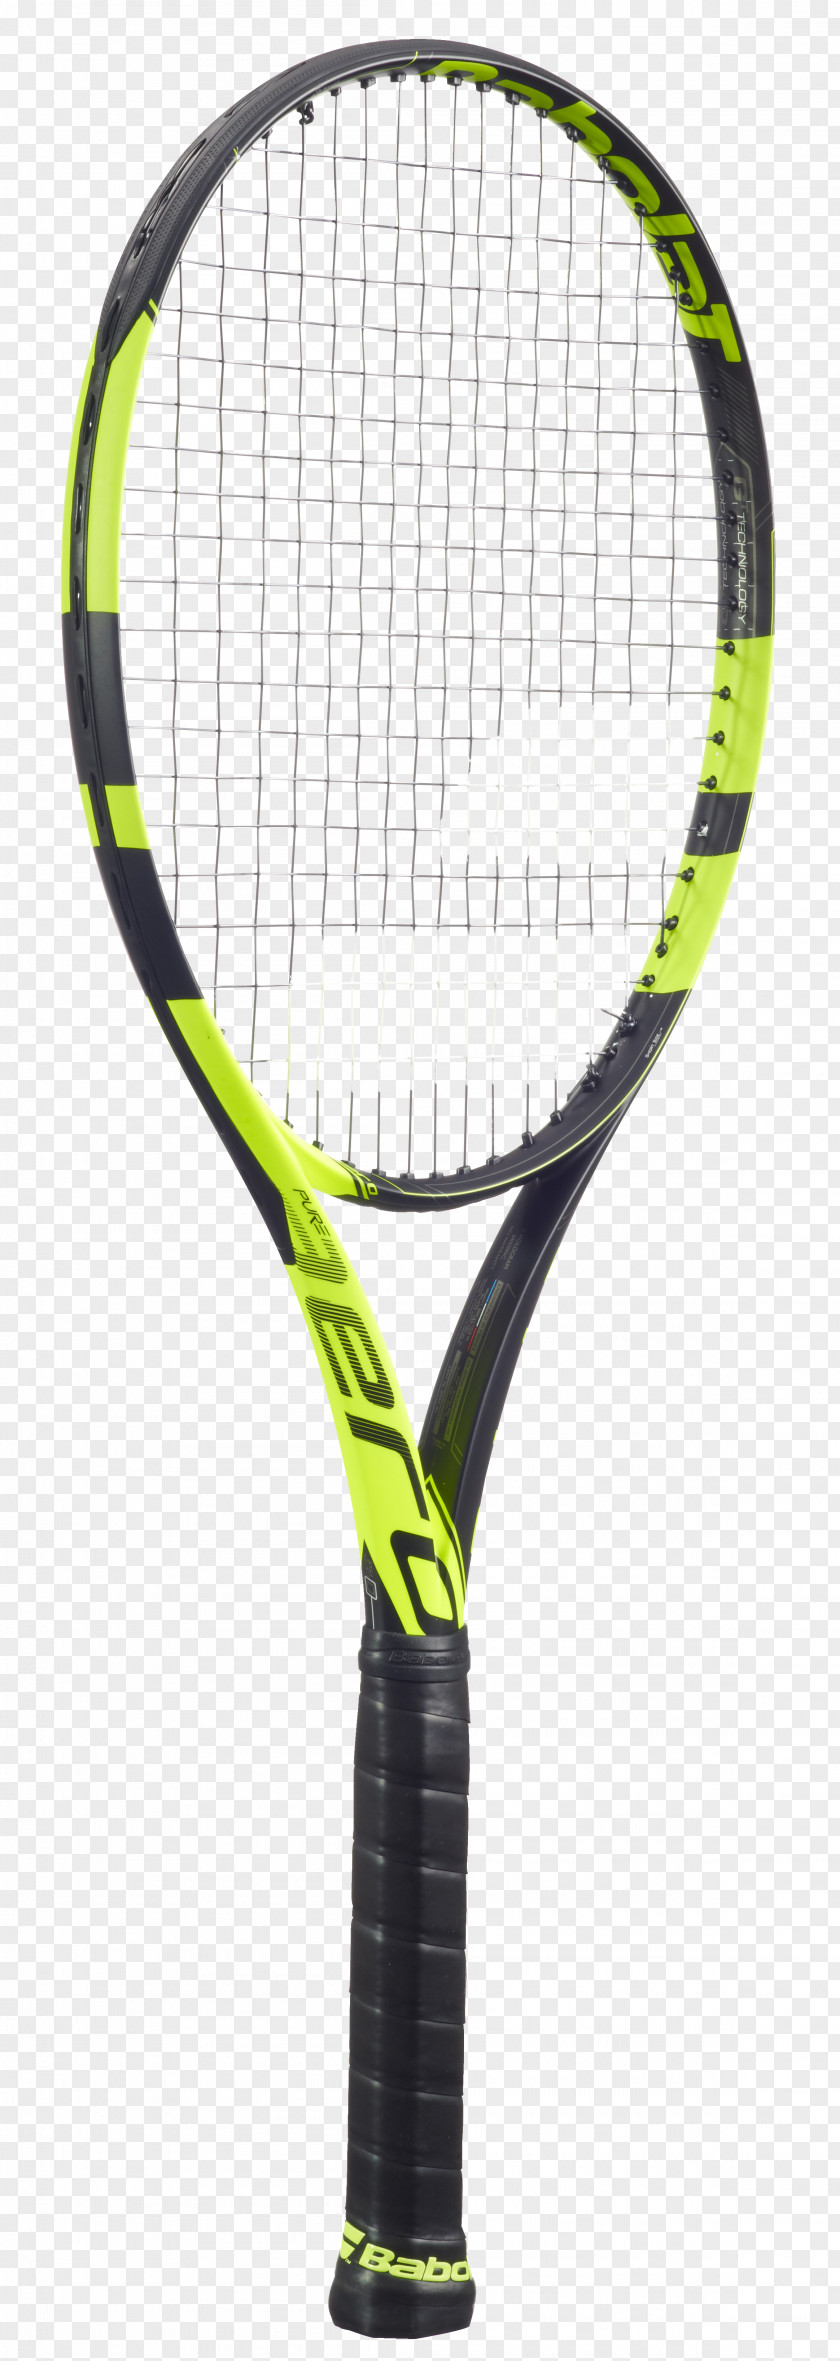 Tennis French Open Babolat Racket Grip PNG